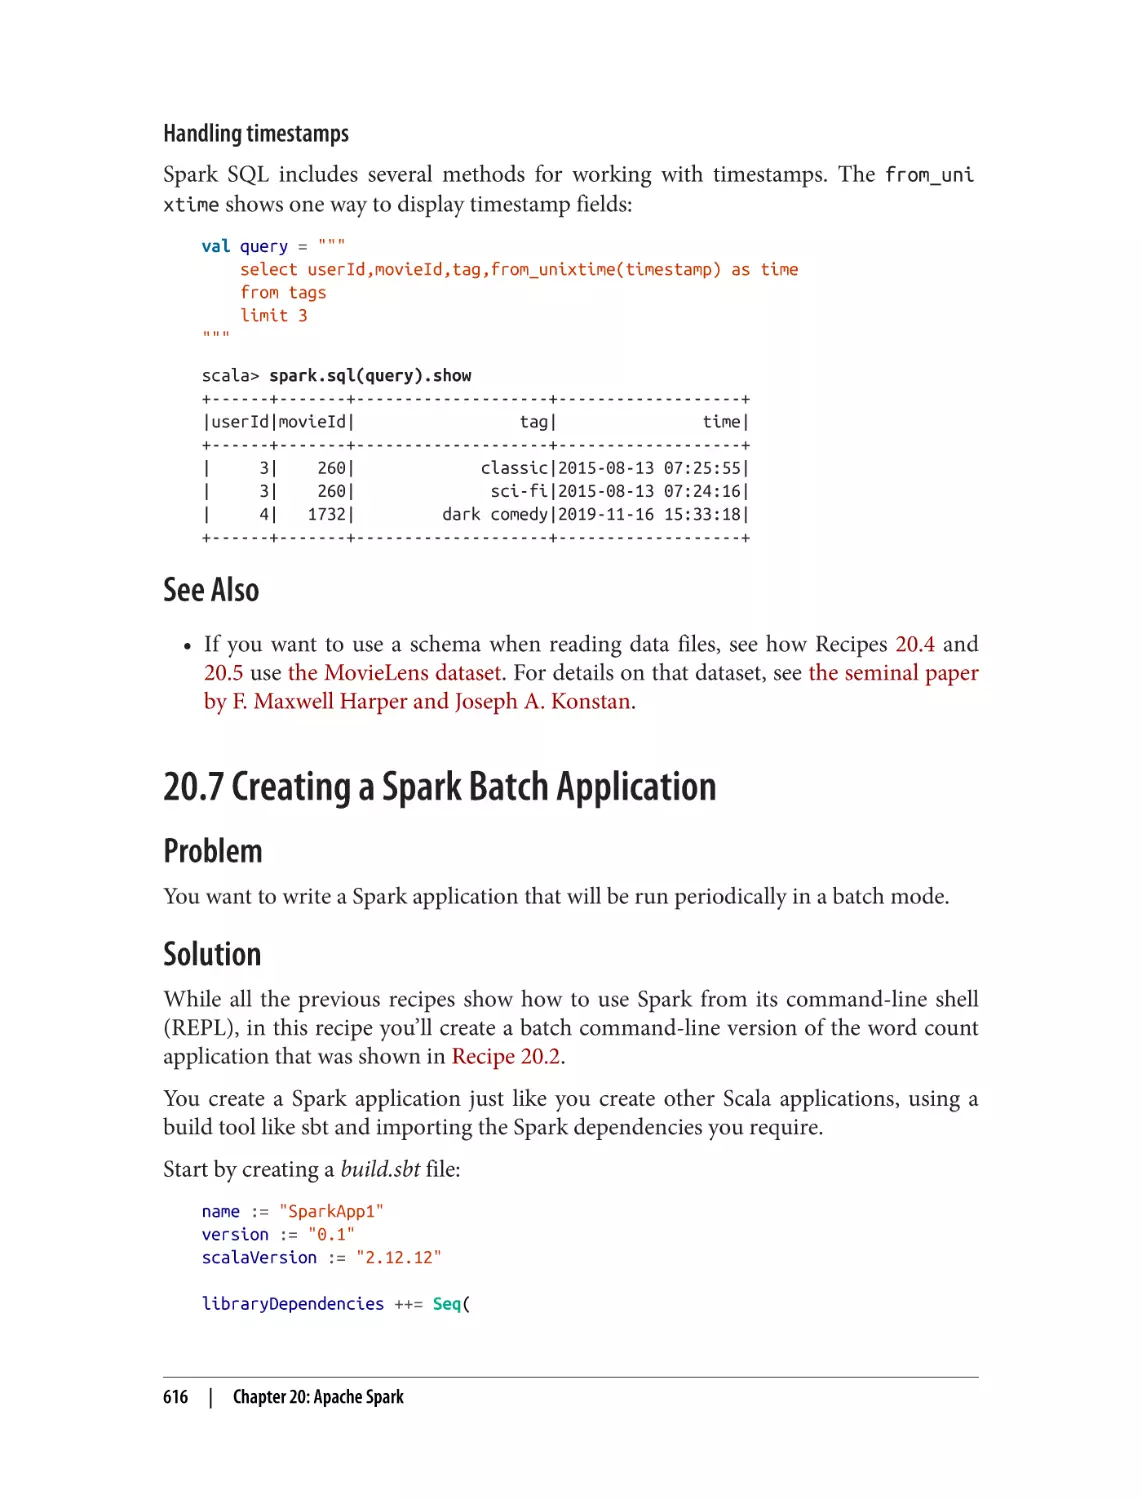 See Also
20.7 Creating a Spark Batch Application
Problem
Solution